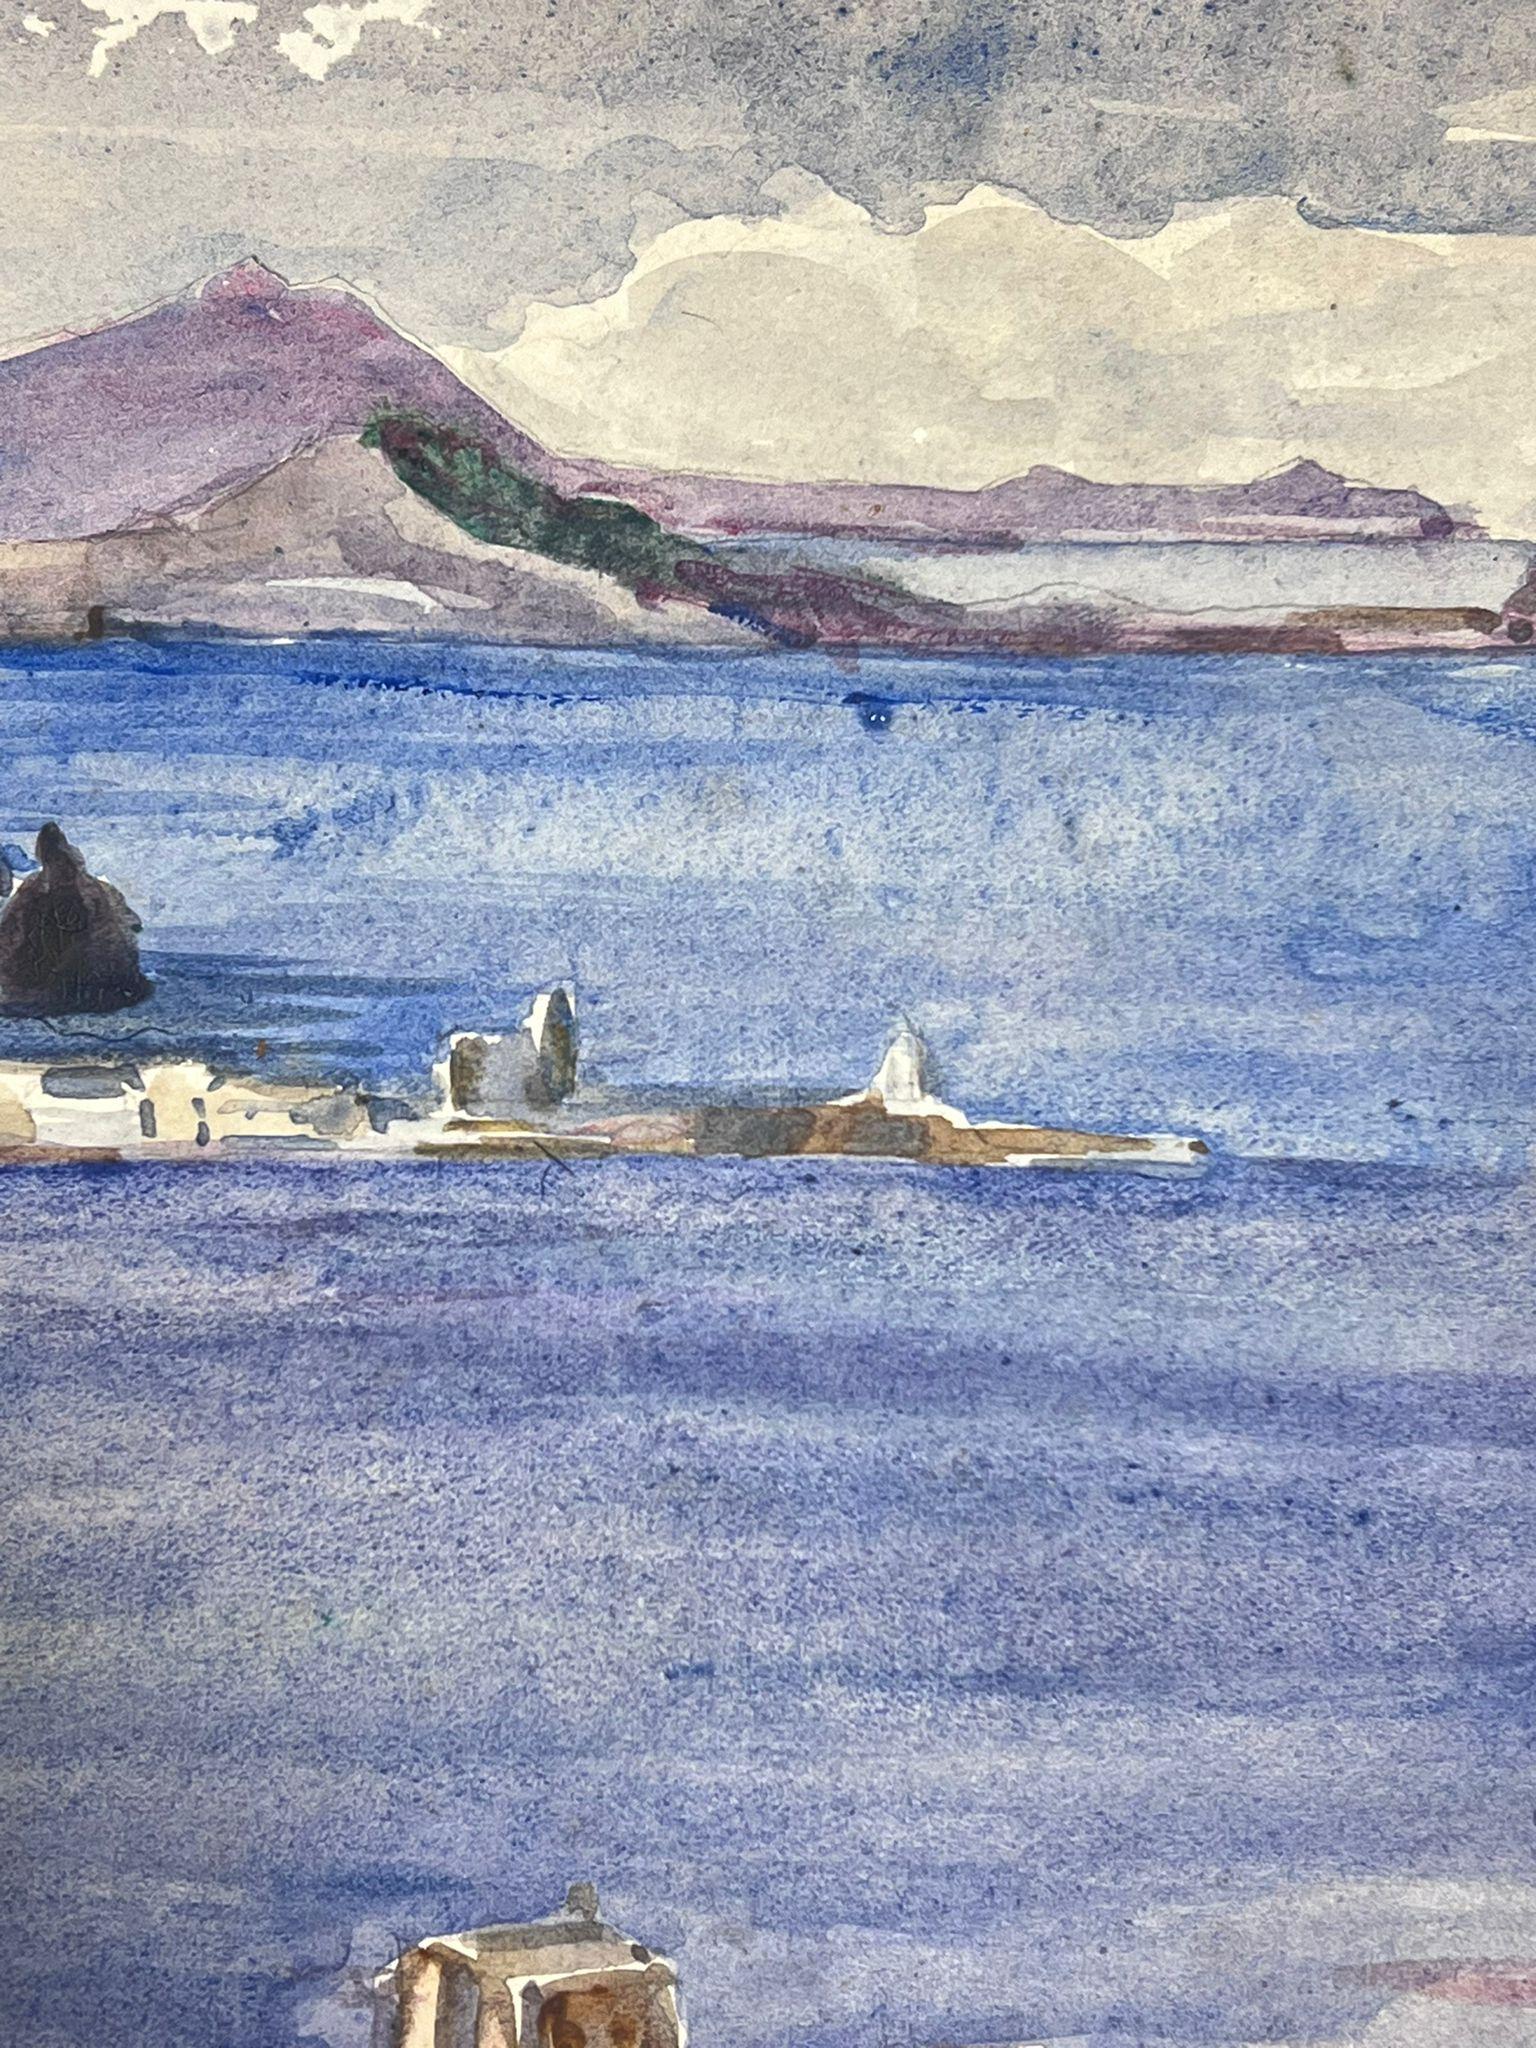 Blue Sea Landscape
by Louise Alix, French 1950's Impressionist 
watercolour on artist paper stuck on board, unframed
painting: 7.25 x 9.25 inches
provenance: from a large private collection of this artists work in Northern France
condition: